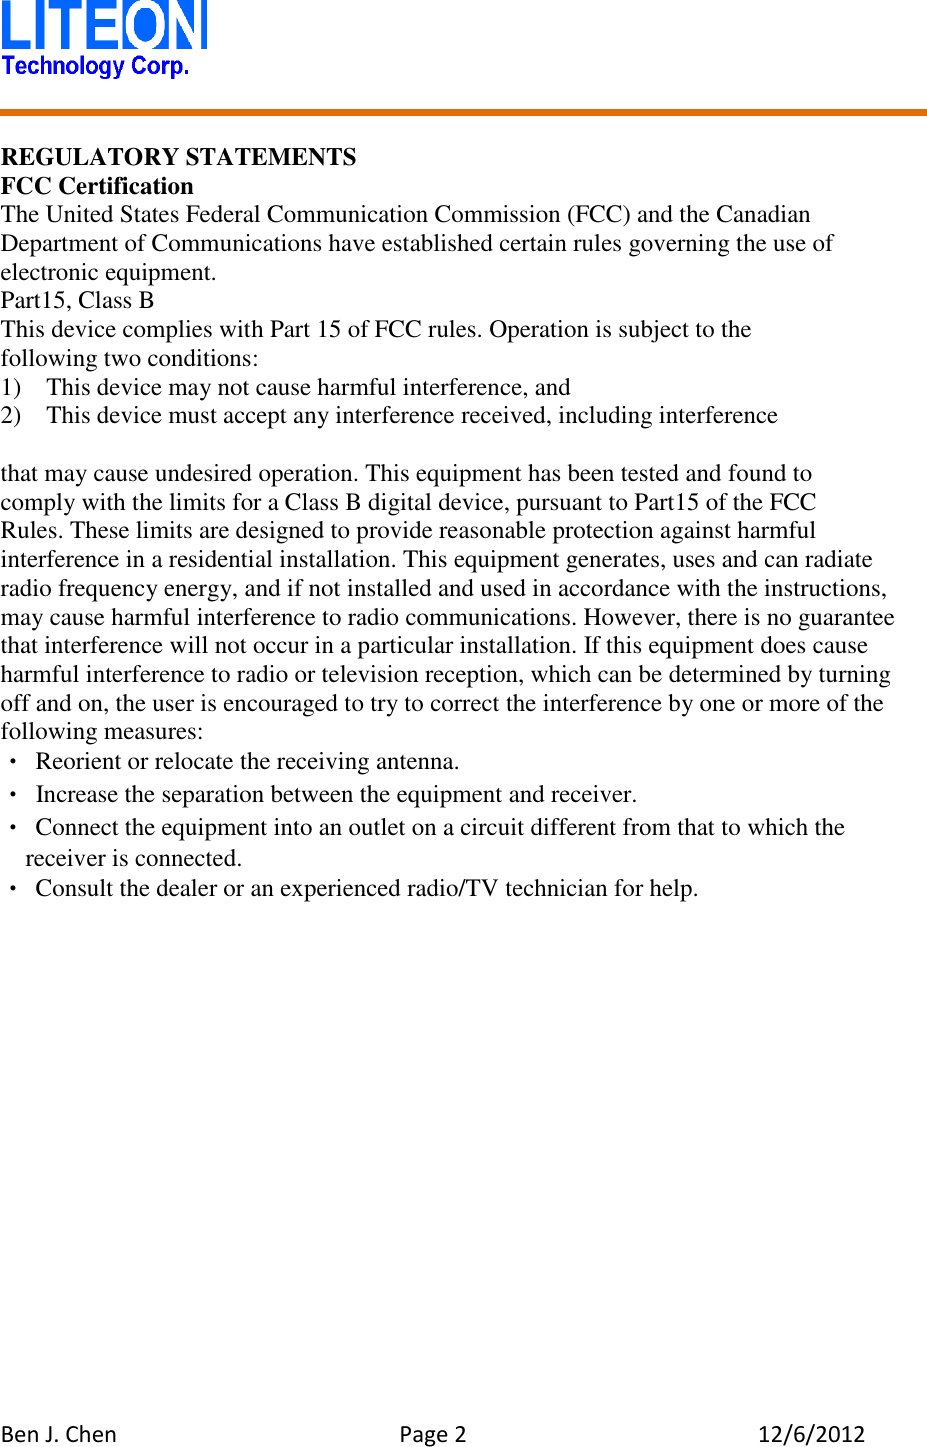   Ben J. Chen  Page 2  12/6/2012    REGULATORY STATEMENTS FCC Certification The United States Federal Communication Commission (FCC) and the Canadian Department of Communications have established certain rules governing the use of electronic equipment. Part15, Class B This device complies with Part 15 of FCC rules. Operation is subject to the following two conditions: 1)    This device may not cause harmful interference, and 2)  This device must accept any interference received, including interference  that may cause undesired operation. This equipment has been tested and found to   comply with the limits for a Class B digital device, pursuant to Part15 of the FCC   Rules. These limits are designed to provide reasonable protection against harmful interference in a residential installation. This equipment generates, uses and can radiate radio frequency energy, and if not installed and used in accordance with the instructions, may cause harmful interference to radio communications. However, there is no guarantee that interference will not occur in a particular installation. If this equipment does cause harmful interference to radio or television reception, which can be determined by turning off and on, the user is encouraged to try to correct the interference by one or more of the following measures: • Reorient or relocate the receiving antenna. •  Increase the separation between the equipment and receiver. • Connect the equipment into an outlet on a circuit different from that to which the receiver is connected. • Consult the dealer or an experienced radio/TV technician for help.    